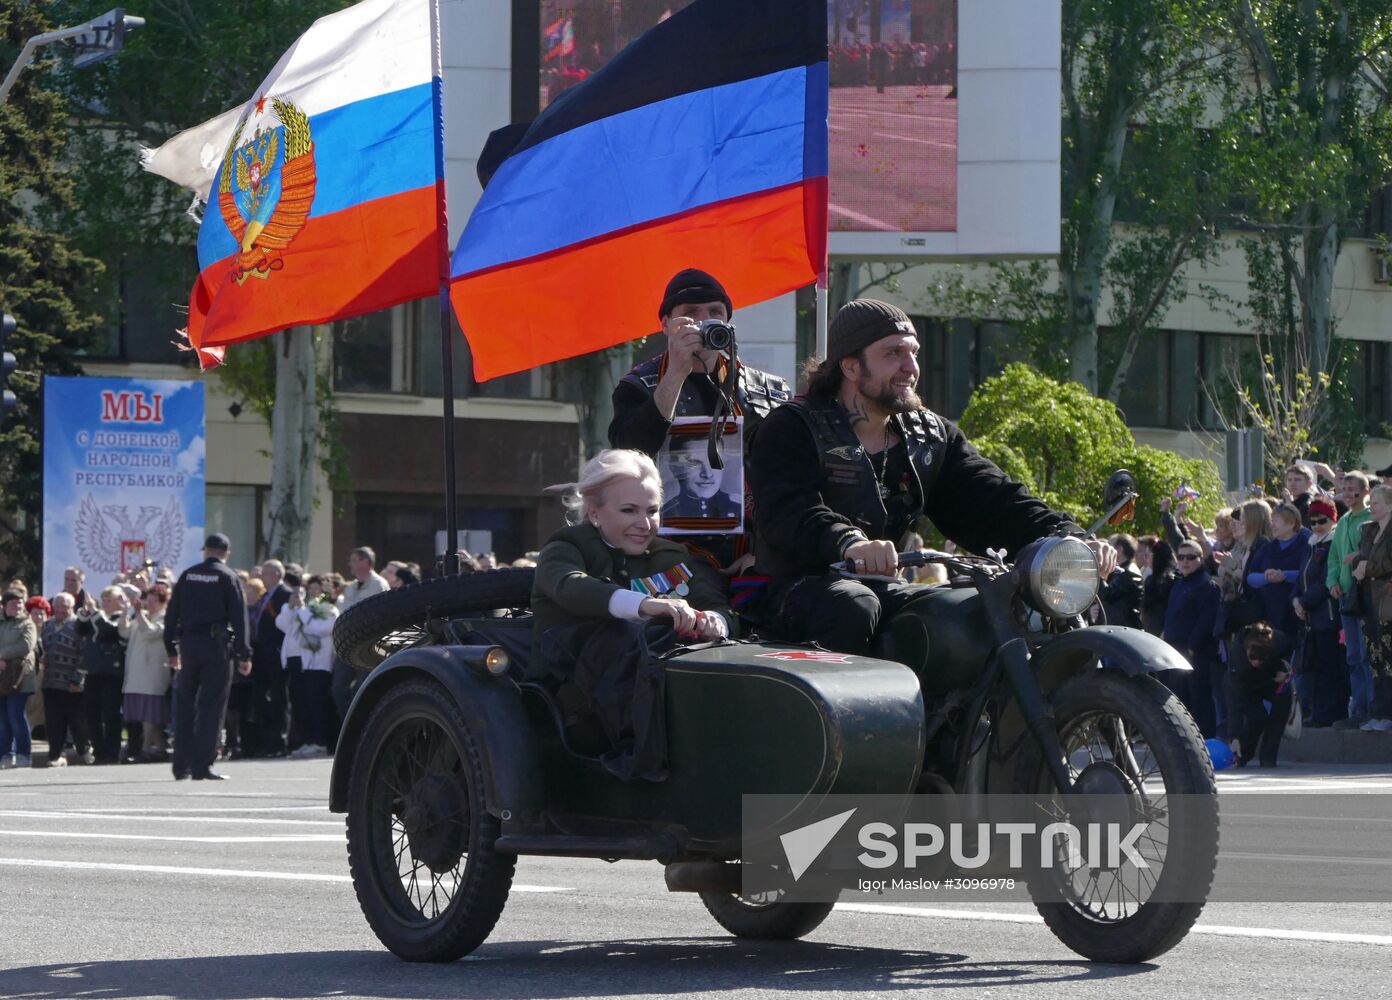 Day of the Republic celebrated in Donetsk